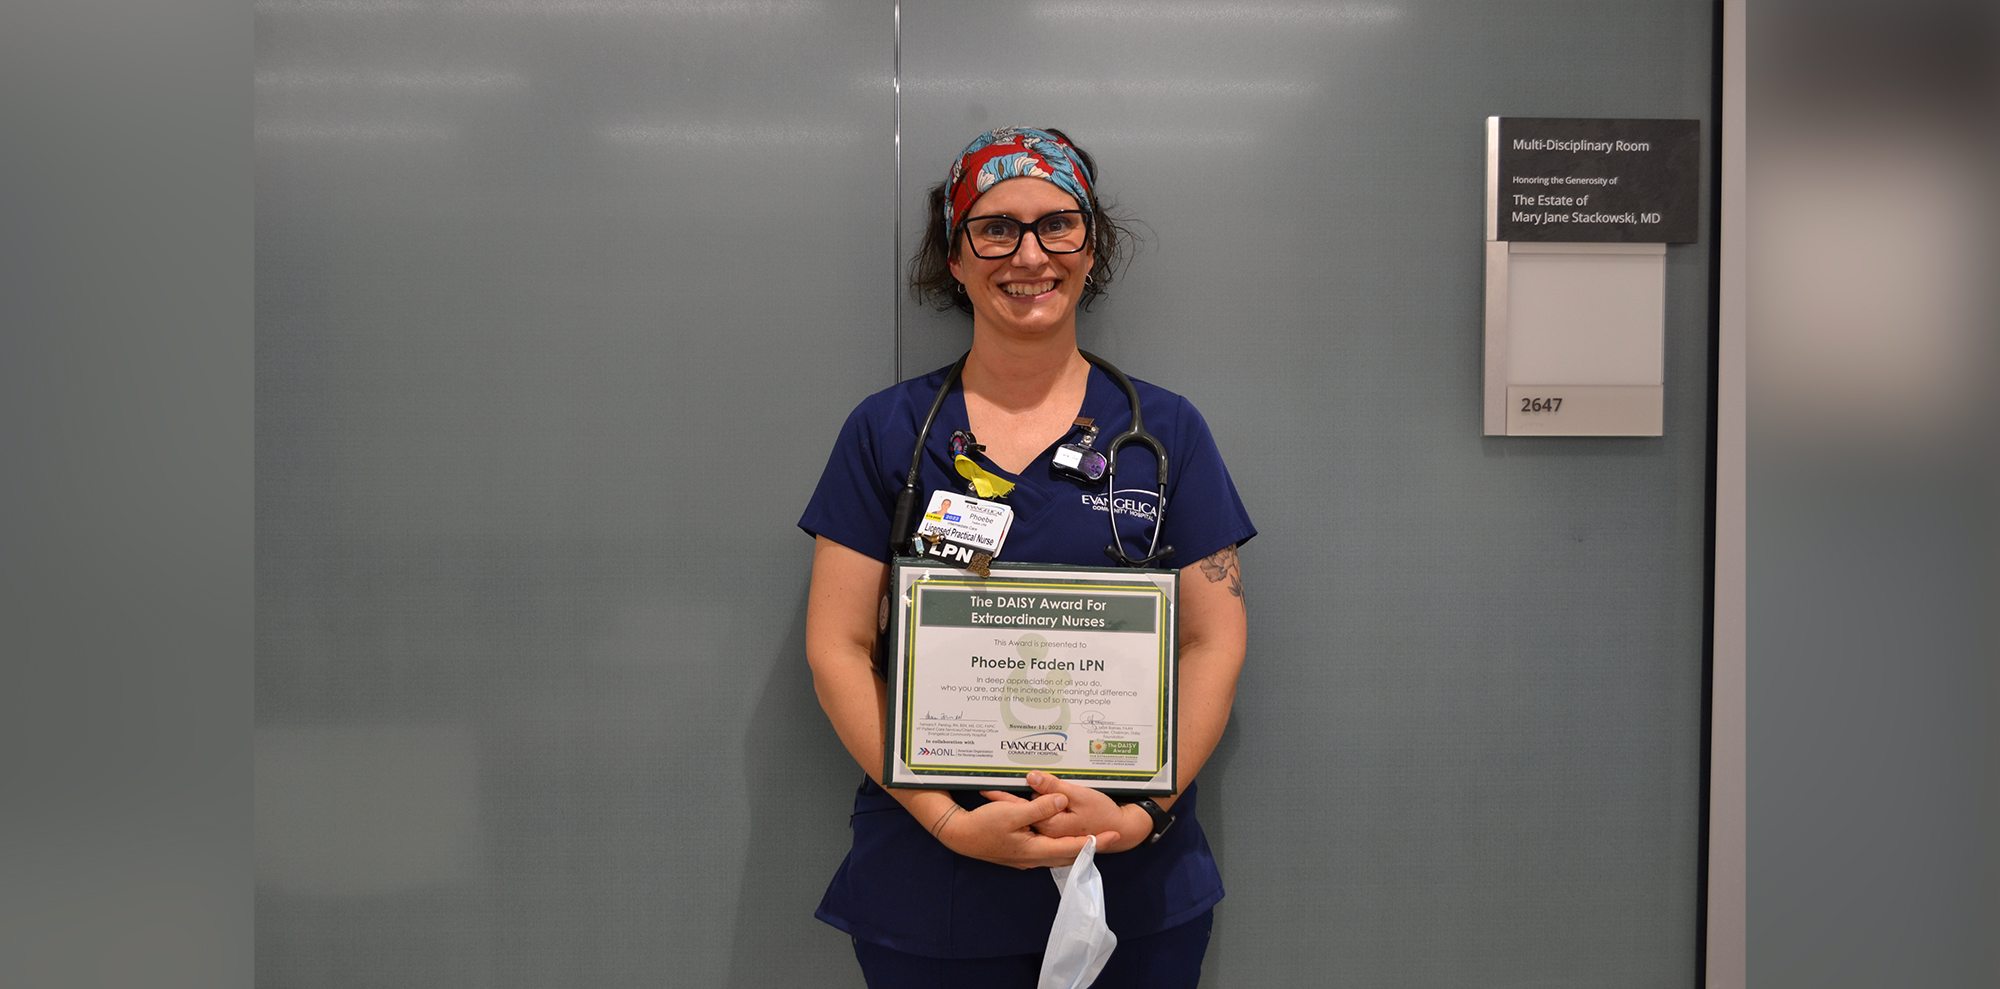 Evangelical Community Hospital Awards DAISY Honor for Nursing Excellence to Phoebe Faden, LPN